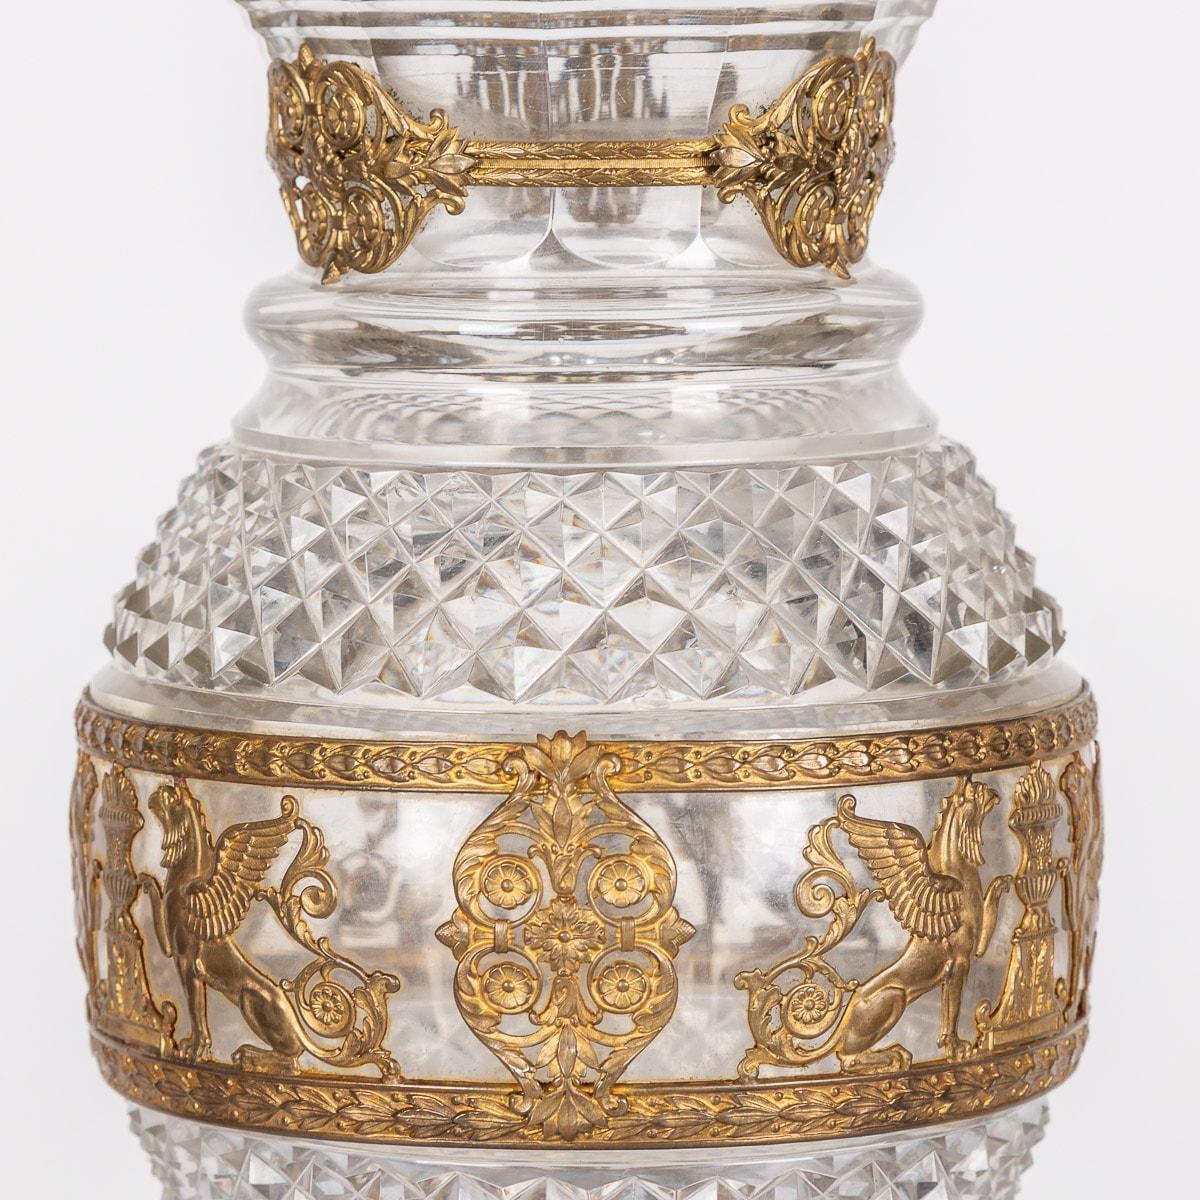 20th Century French Gold Plated & Baccarat Glass Vase, c.1900 For Sale 6